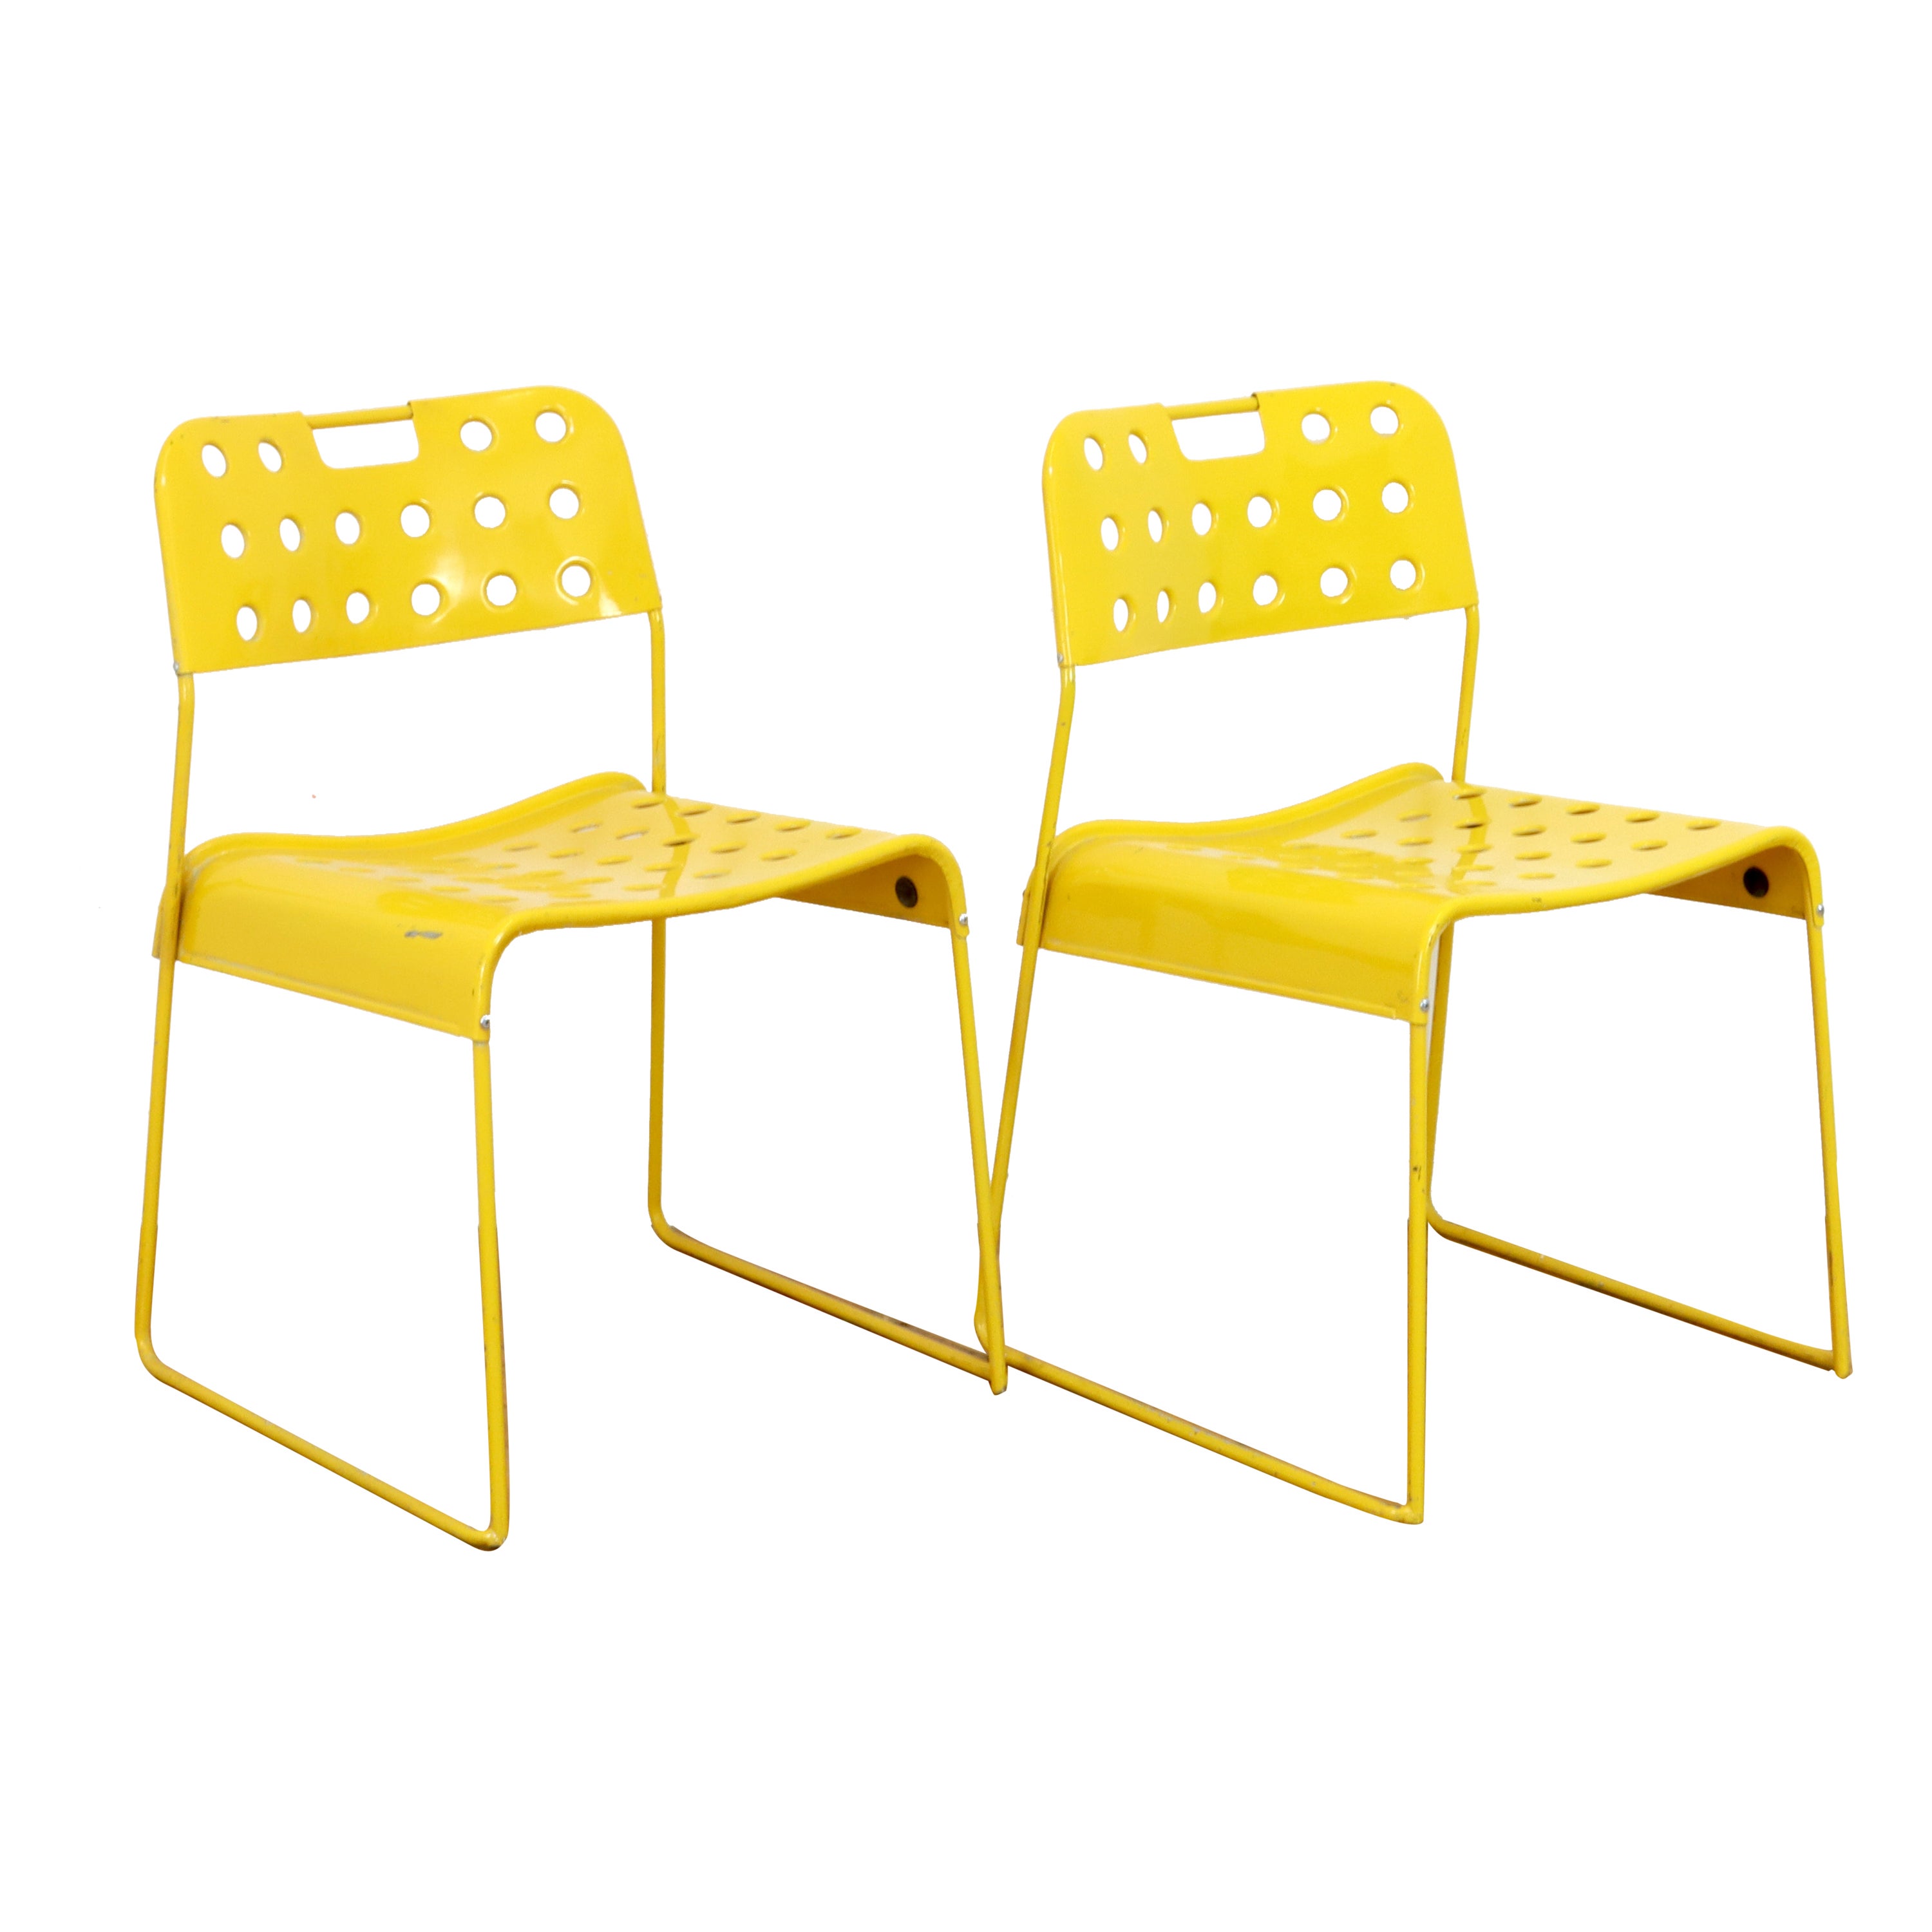 Pair of Vintage Yellow Omkstak Chairs 